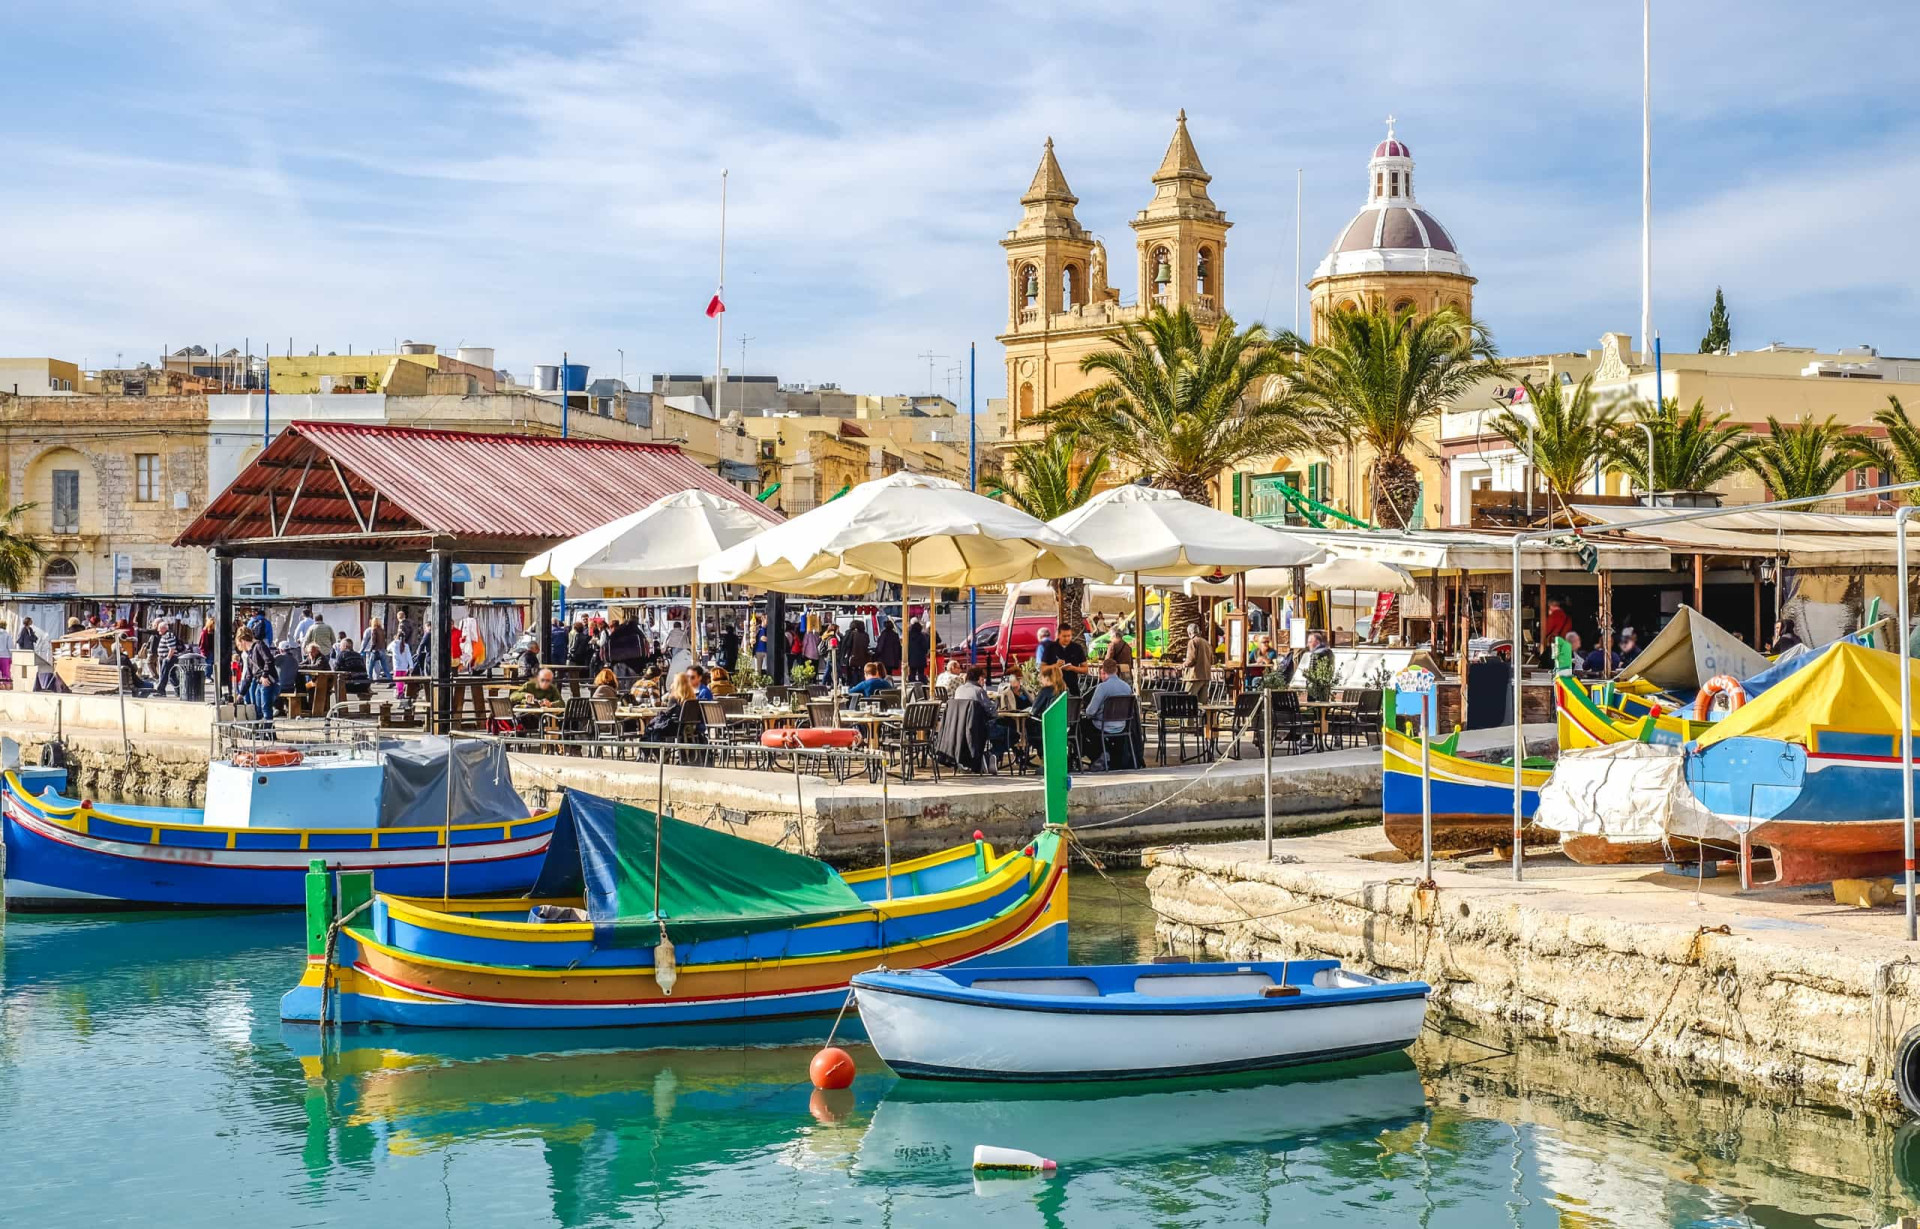 Originally established as a port by the Phoenicians, the <a href="https://uk.starsinsider.com/travel/219779/picturesque-towns-in-europe-you-wont-believe-exist">picturesque fishing village</a> of Marsaxlokk remains the main supplier of fish to the island of Malta. Get there on a Sunday morning to experience the bustling market.<p>You may also like:<a href="https://www.starsinsider.com/n/255946?utm_source=msn.com&utm_medium=display&utm_campaign=referral_description&utm_content=397154v6en-us"> Wildlife photos captured at the perfect moment</a></p>